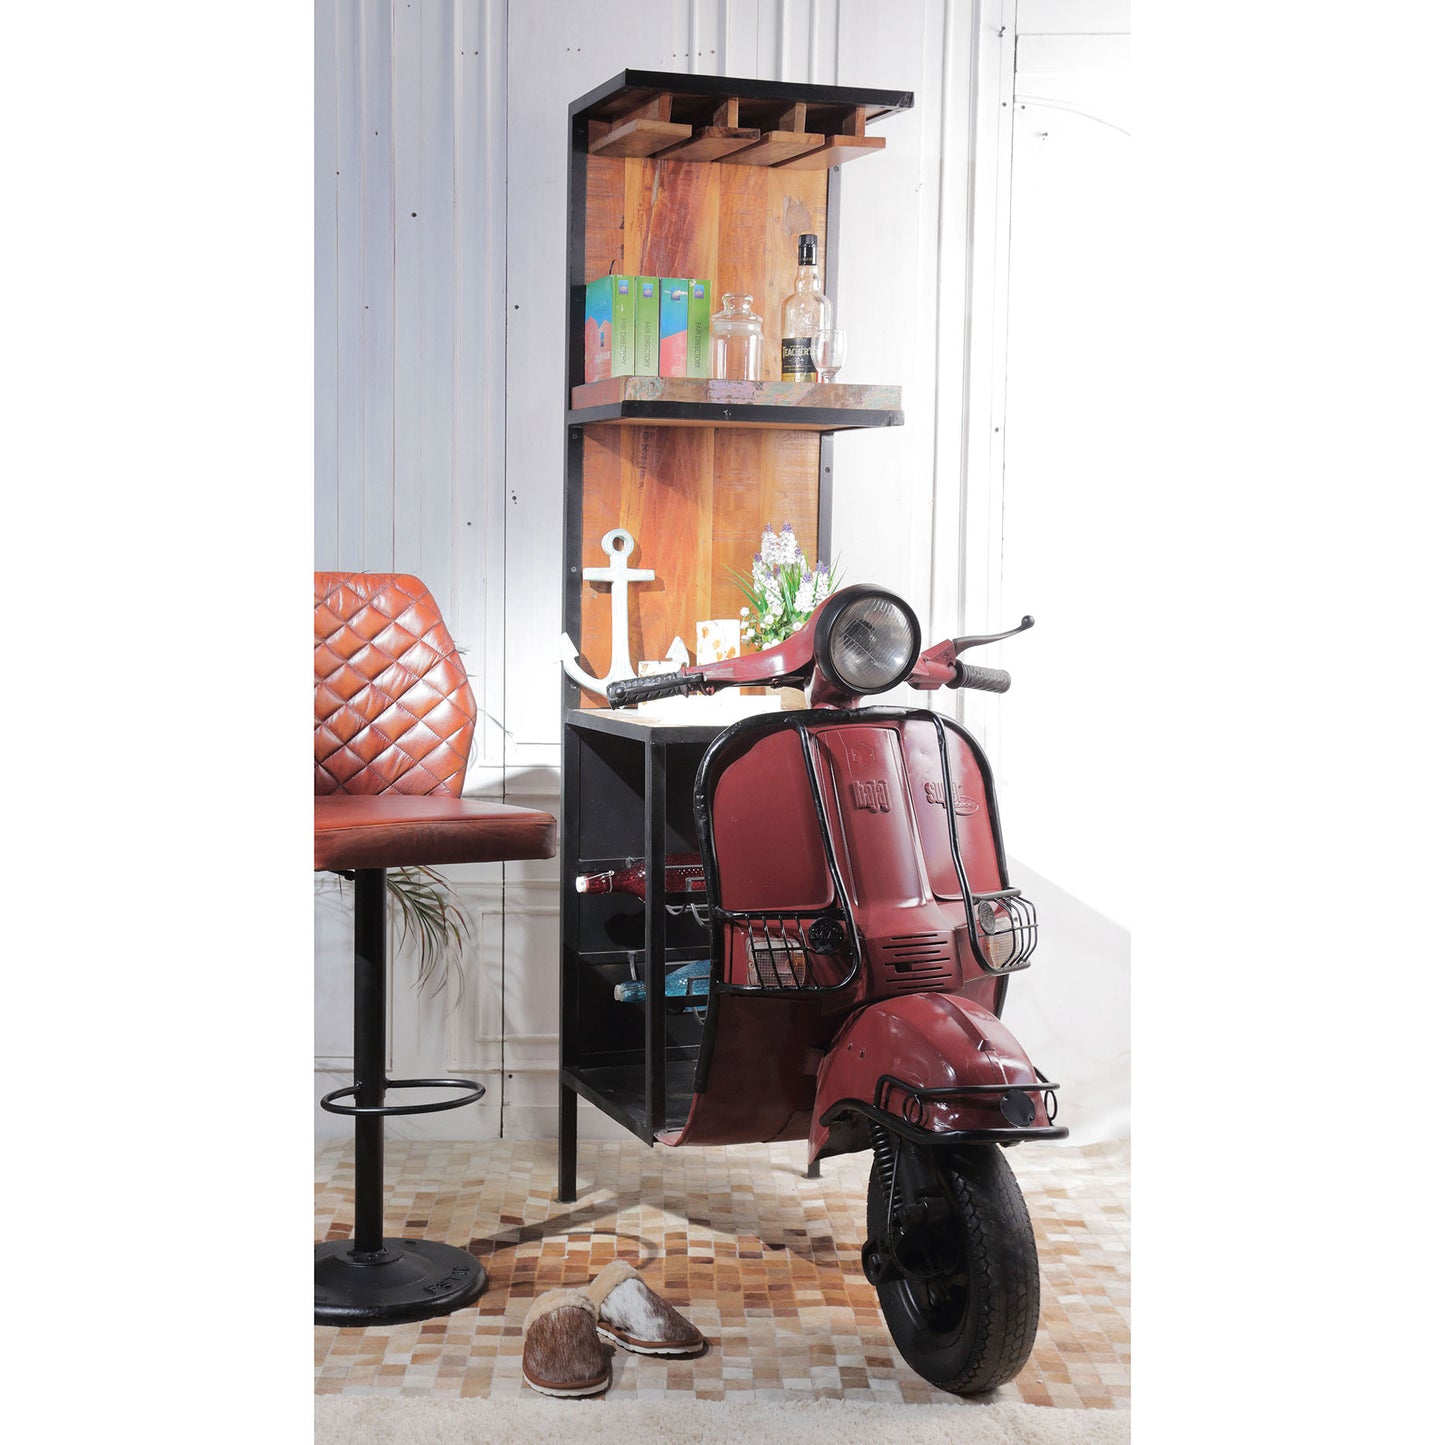 Converted Motor scooter wine bar - decorstore